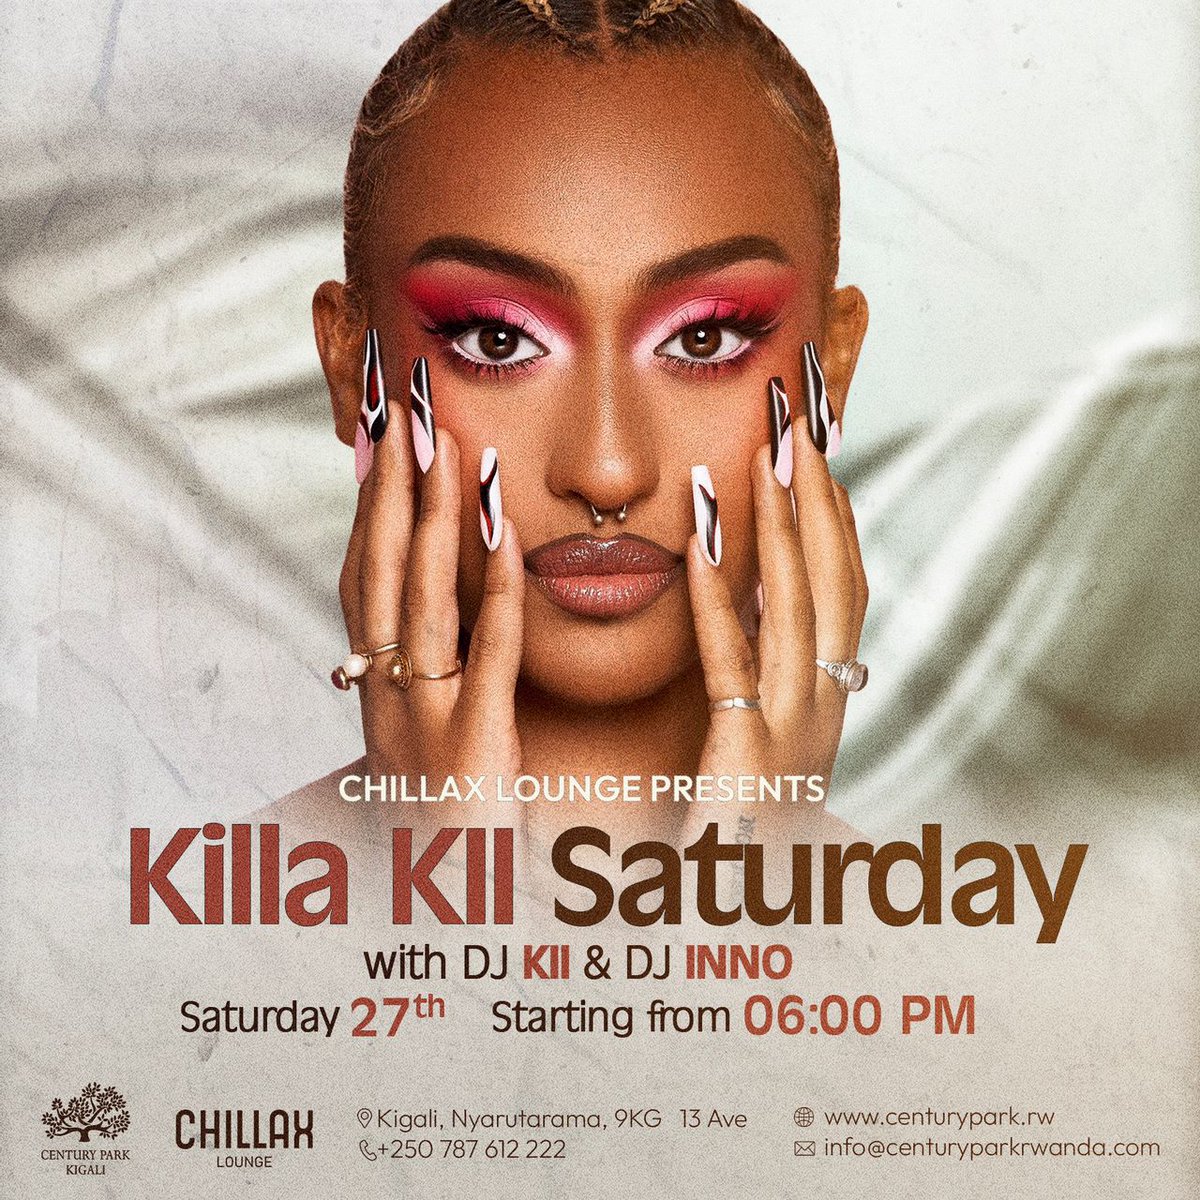 Get ready to turn up the heat this Saturday at #Chillax with the incredible DJ KII! Join the fun and sizzle your weekend away.